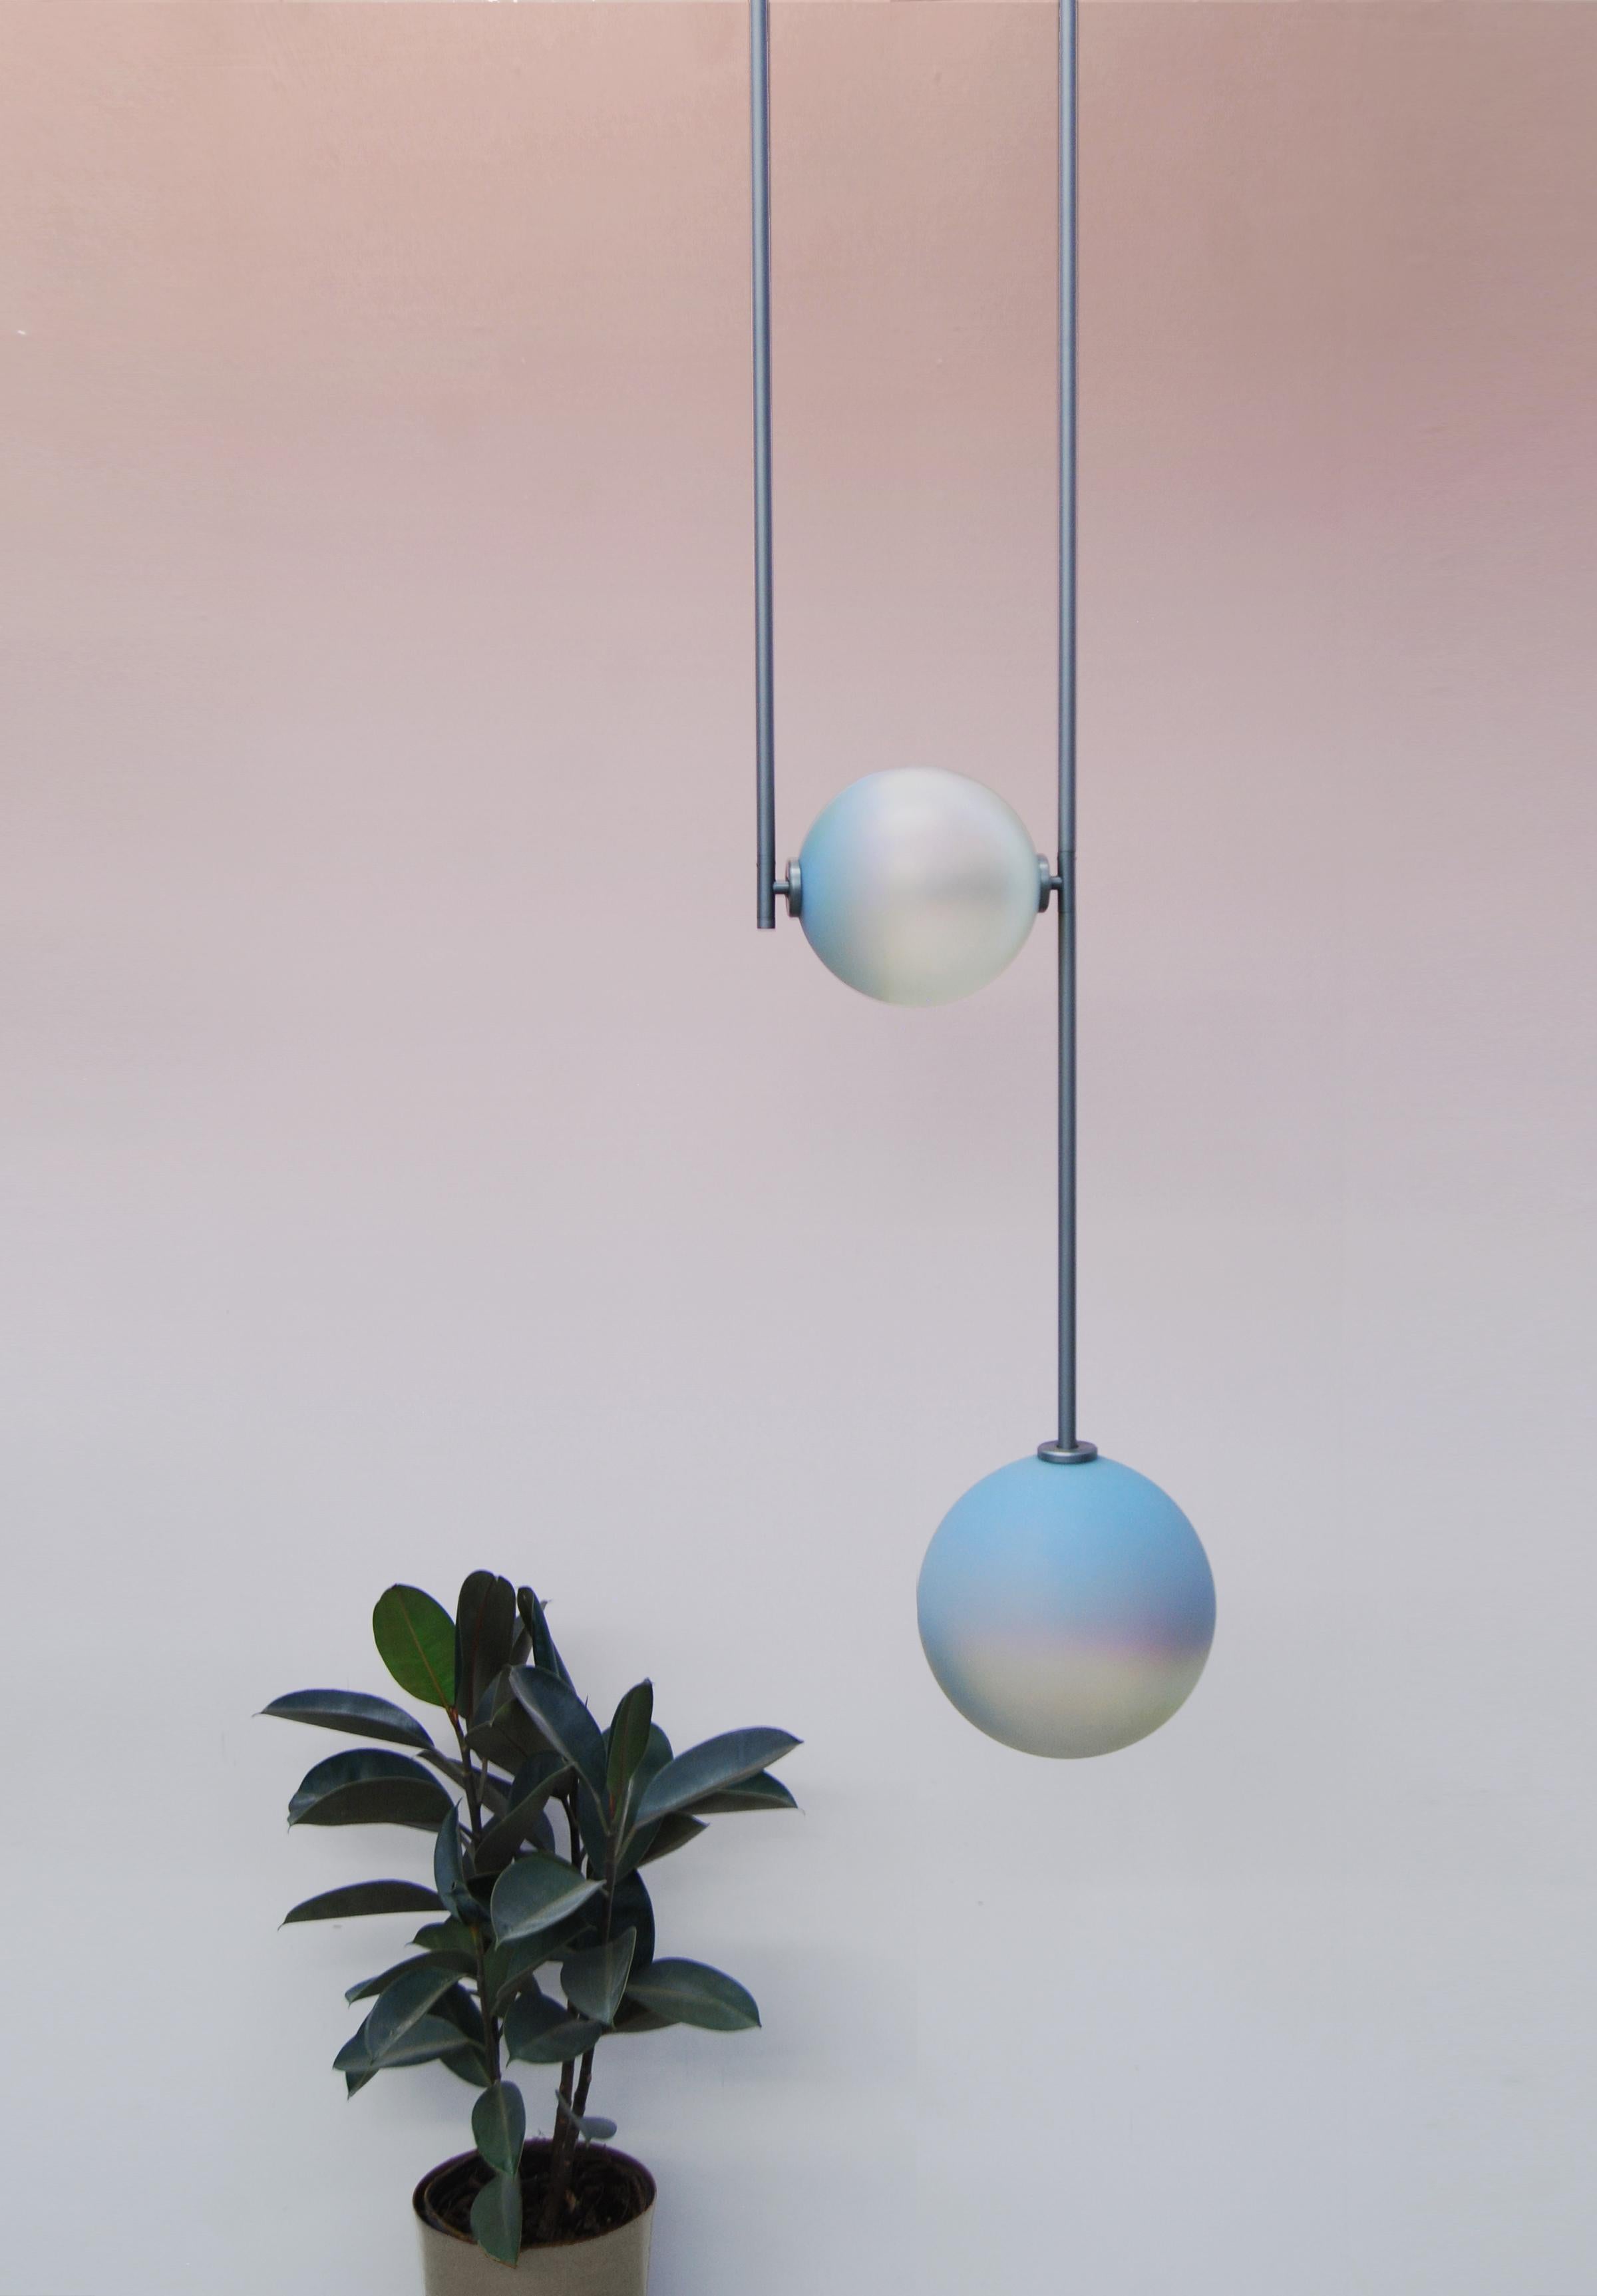 Equalizer chameleon globe pendant light by Ladies & Gentlemen Studio 
Dimensions: Height variable, 12” round canopy
Materials: Copper, brass, wire, cord
Finishes: Black anodize/bronze 
 Anodize/olive anodize
 Glass: cream/smokey